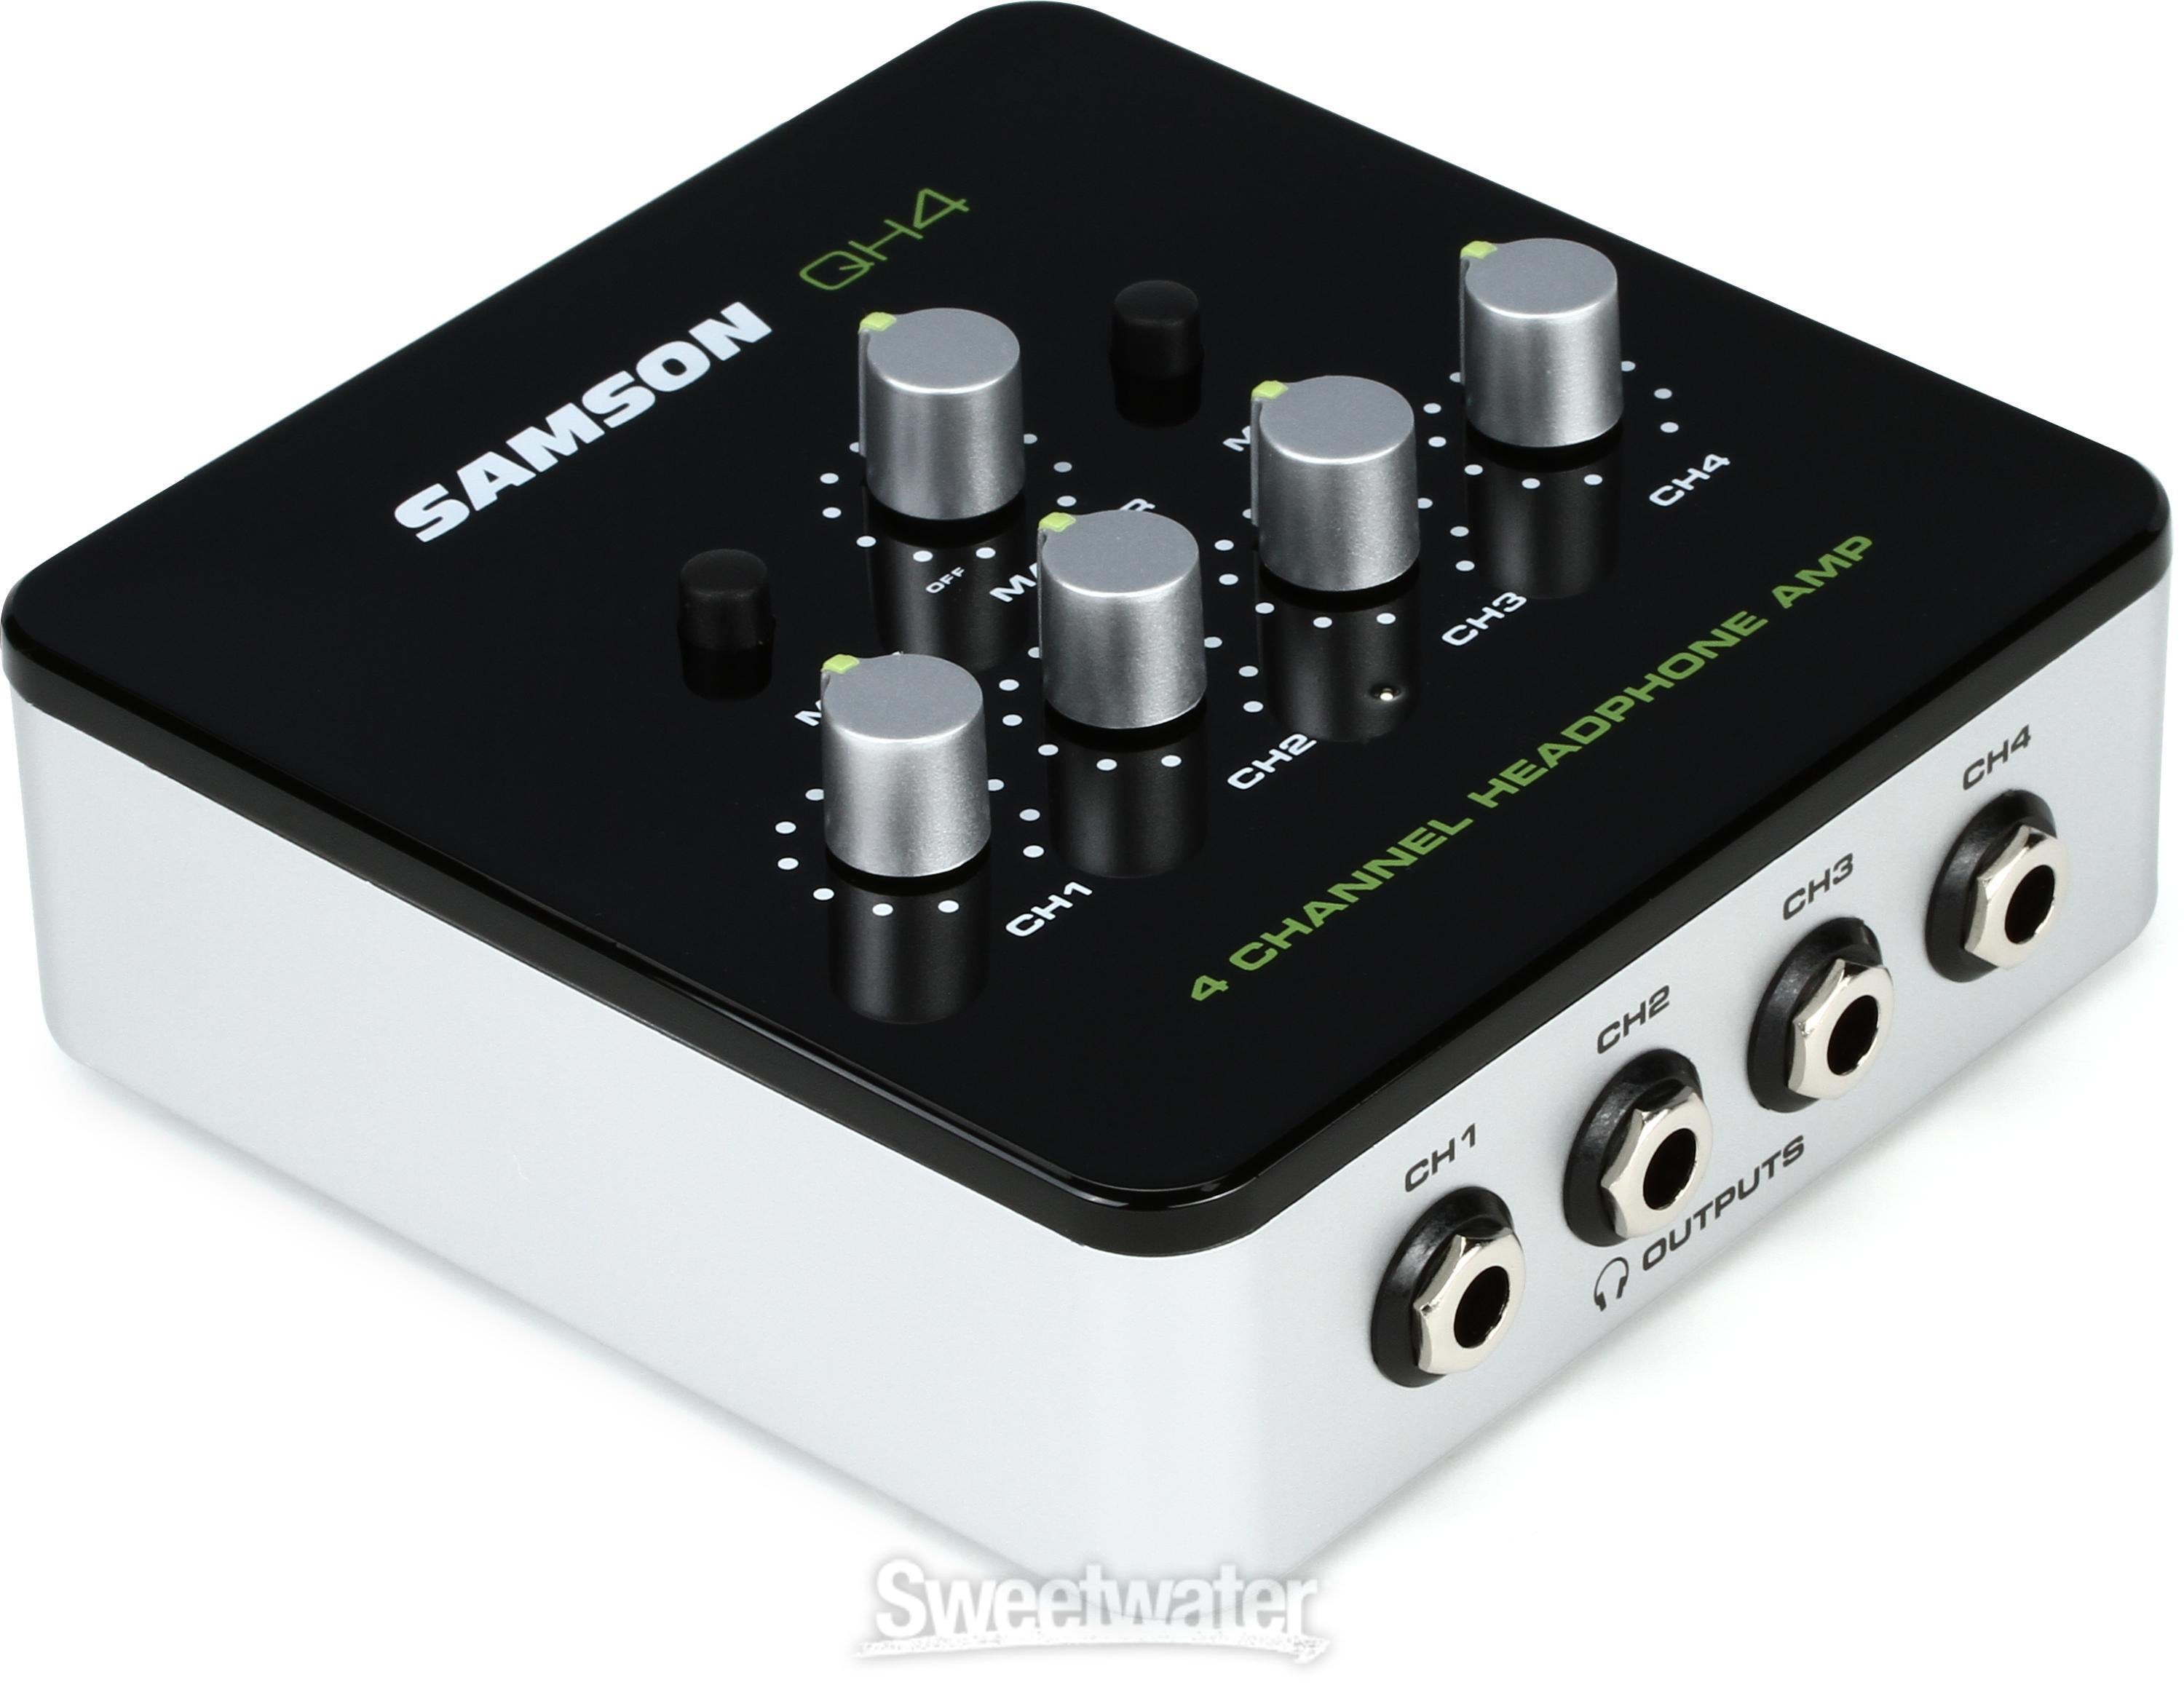 Samson QH4 4-channel Headphone Amplifier Reviews | Sweetwater